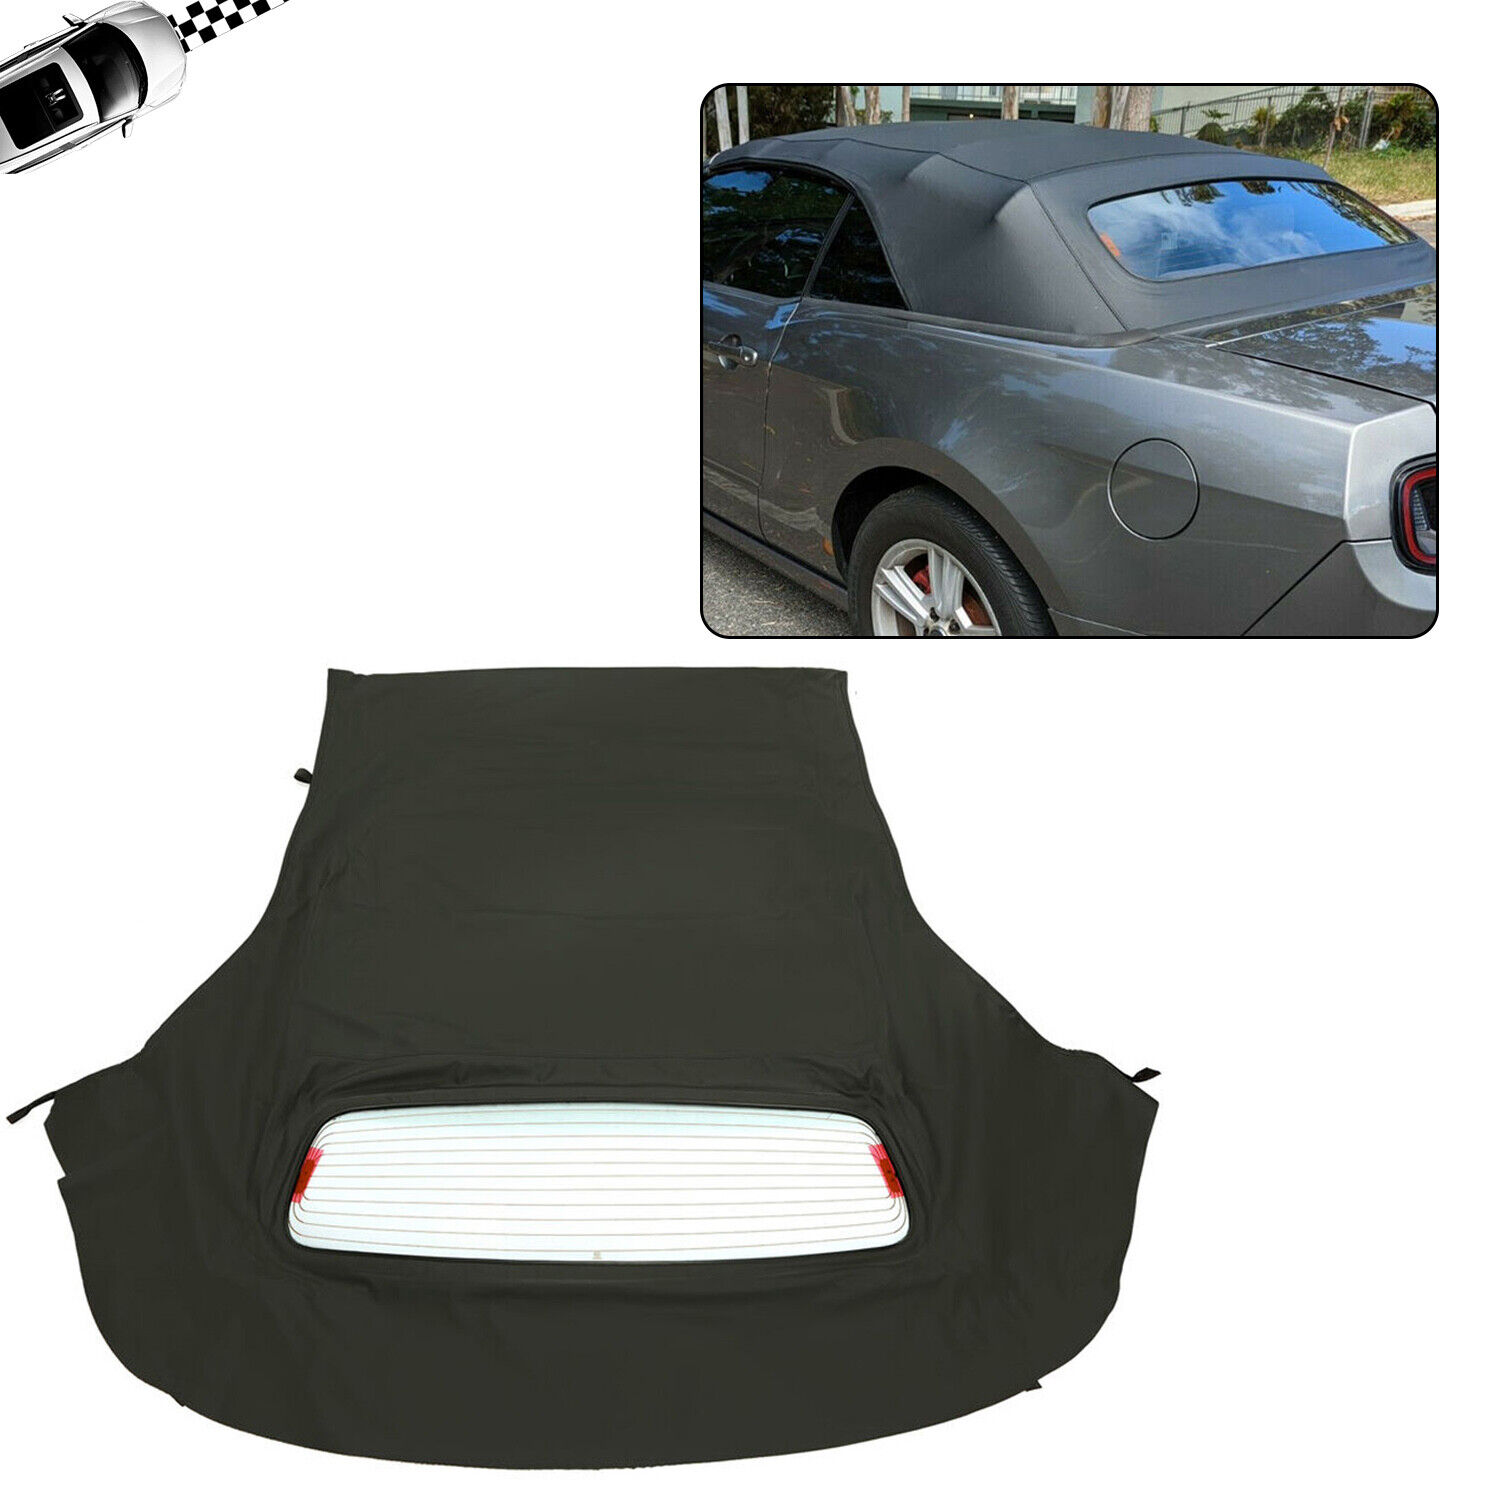 Fits 05-14 Ford Mustang Convertible Soft Top and Heated Glass Window Sailcloth